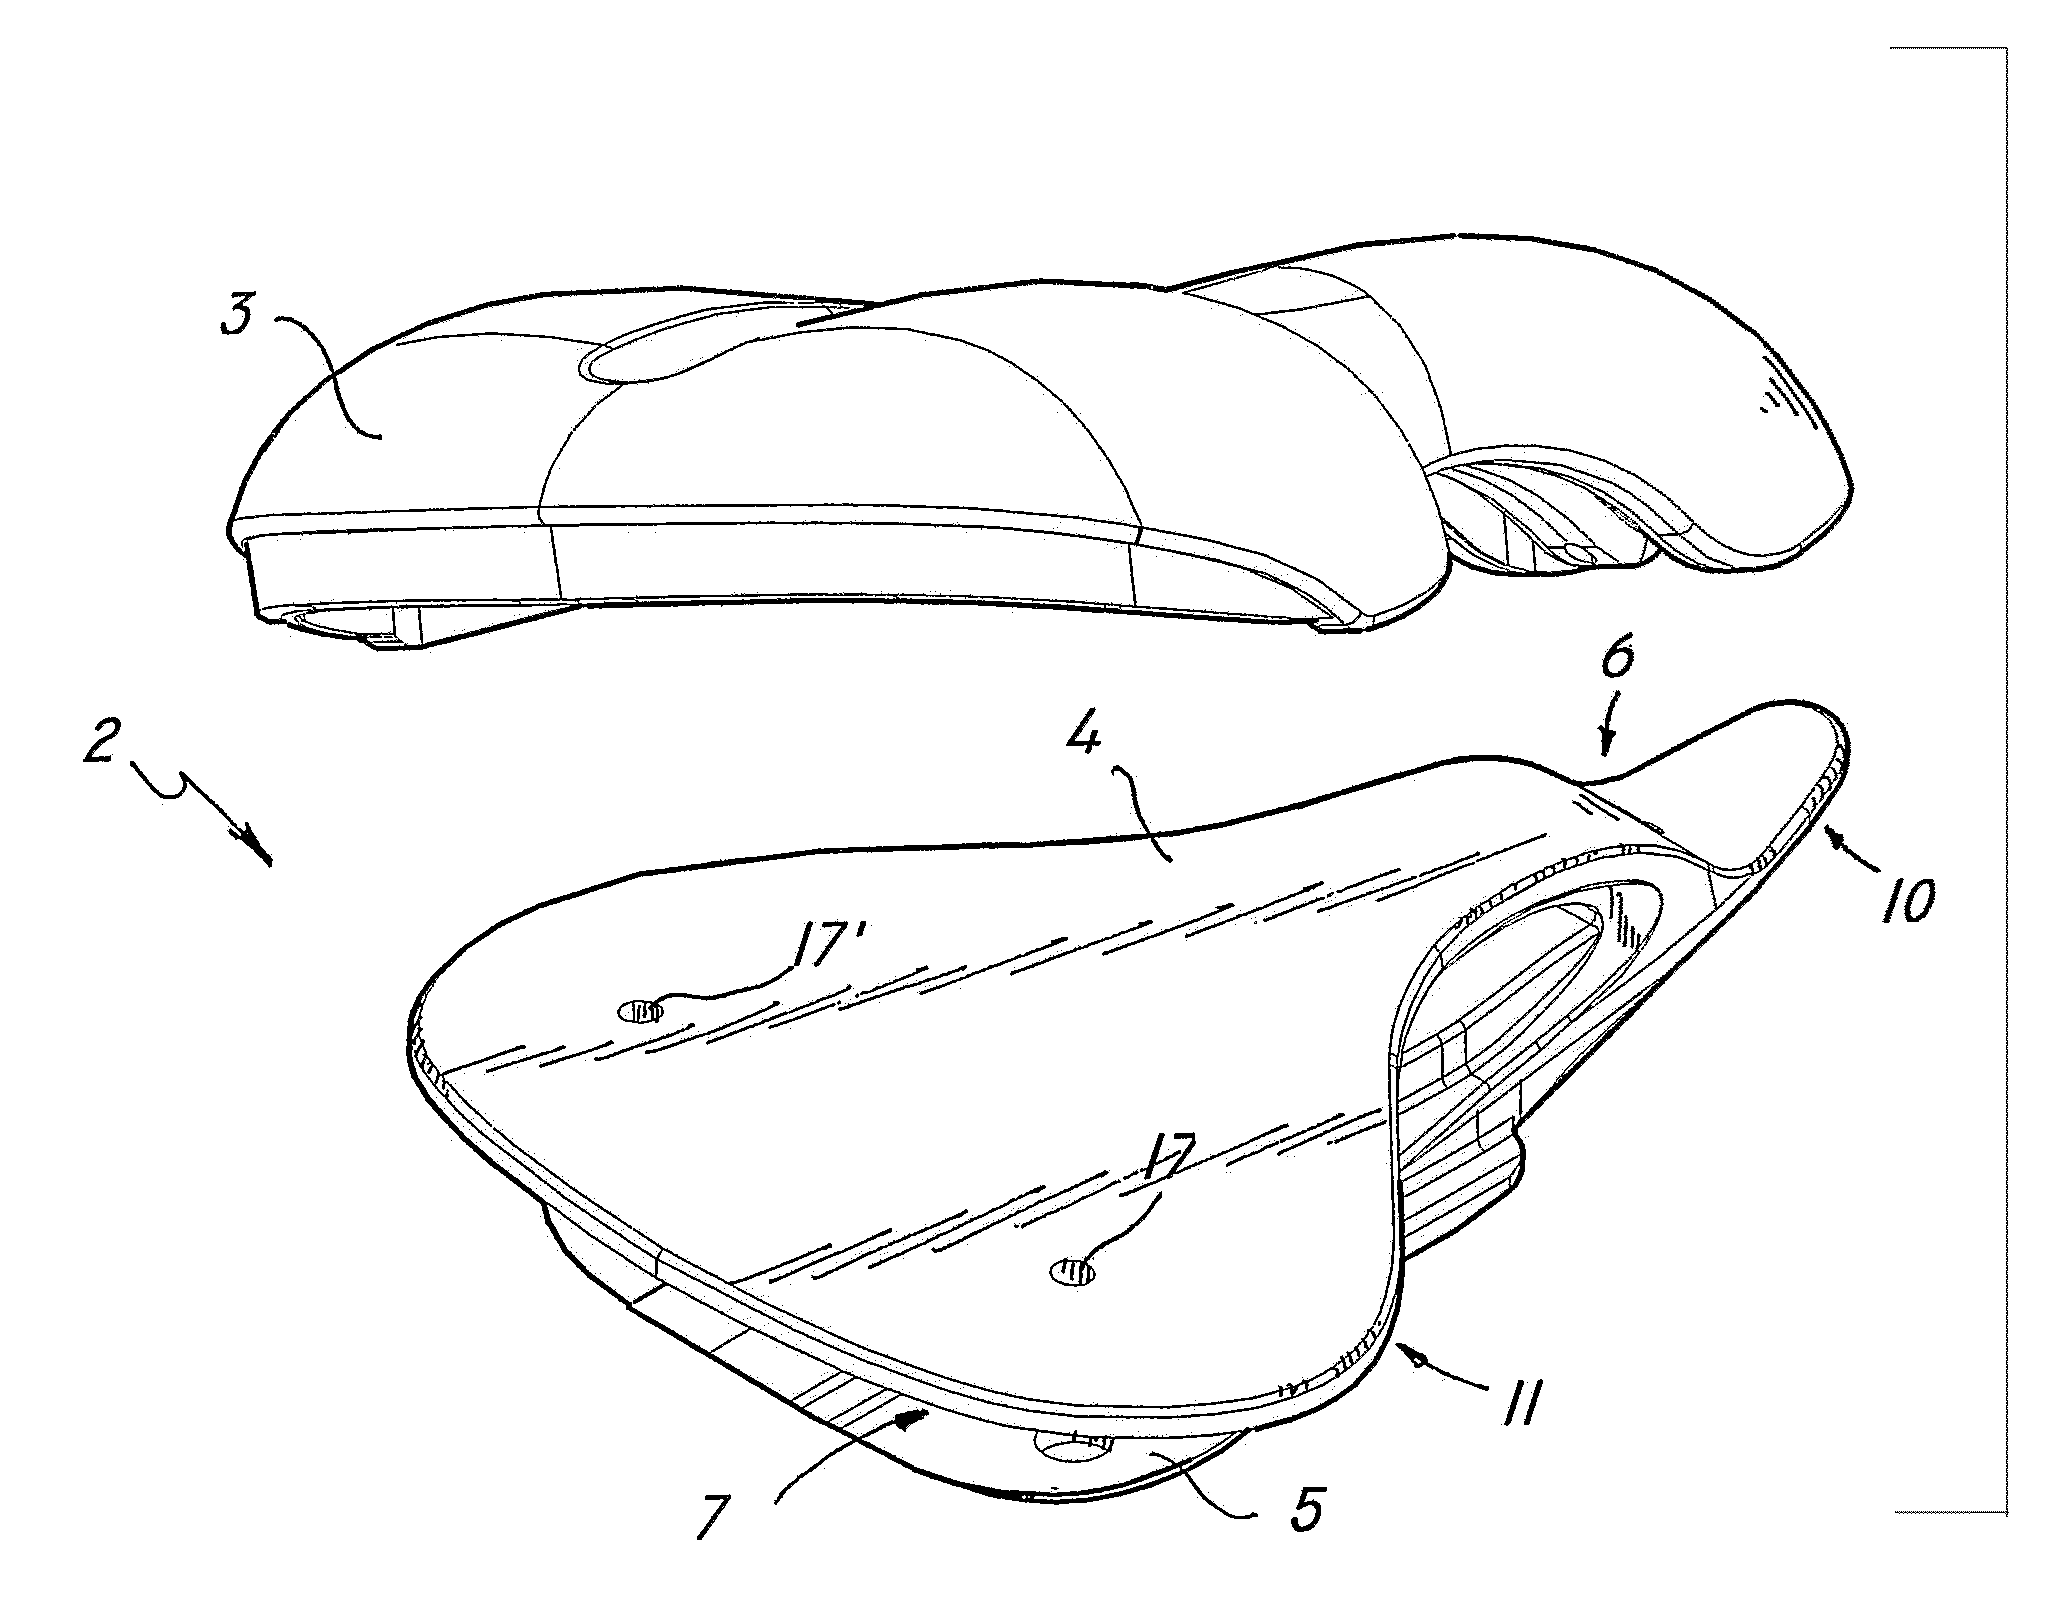 Integrated human body support structure, particularly a saddle or seat for a vehicle